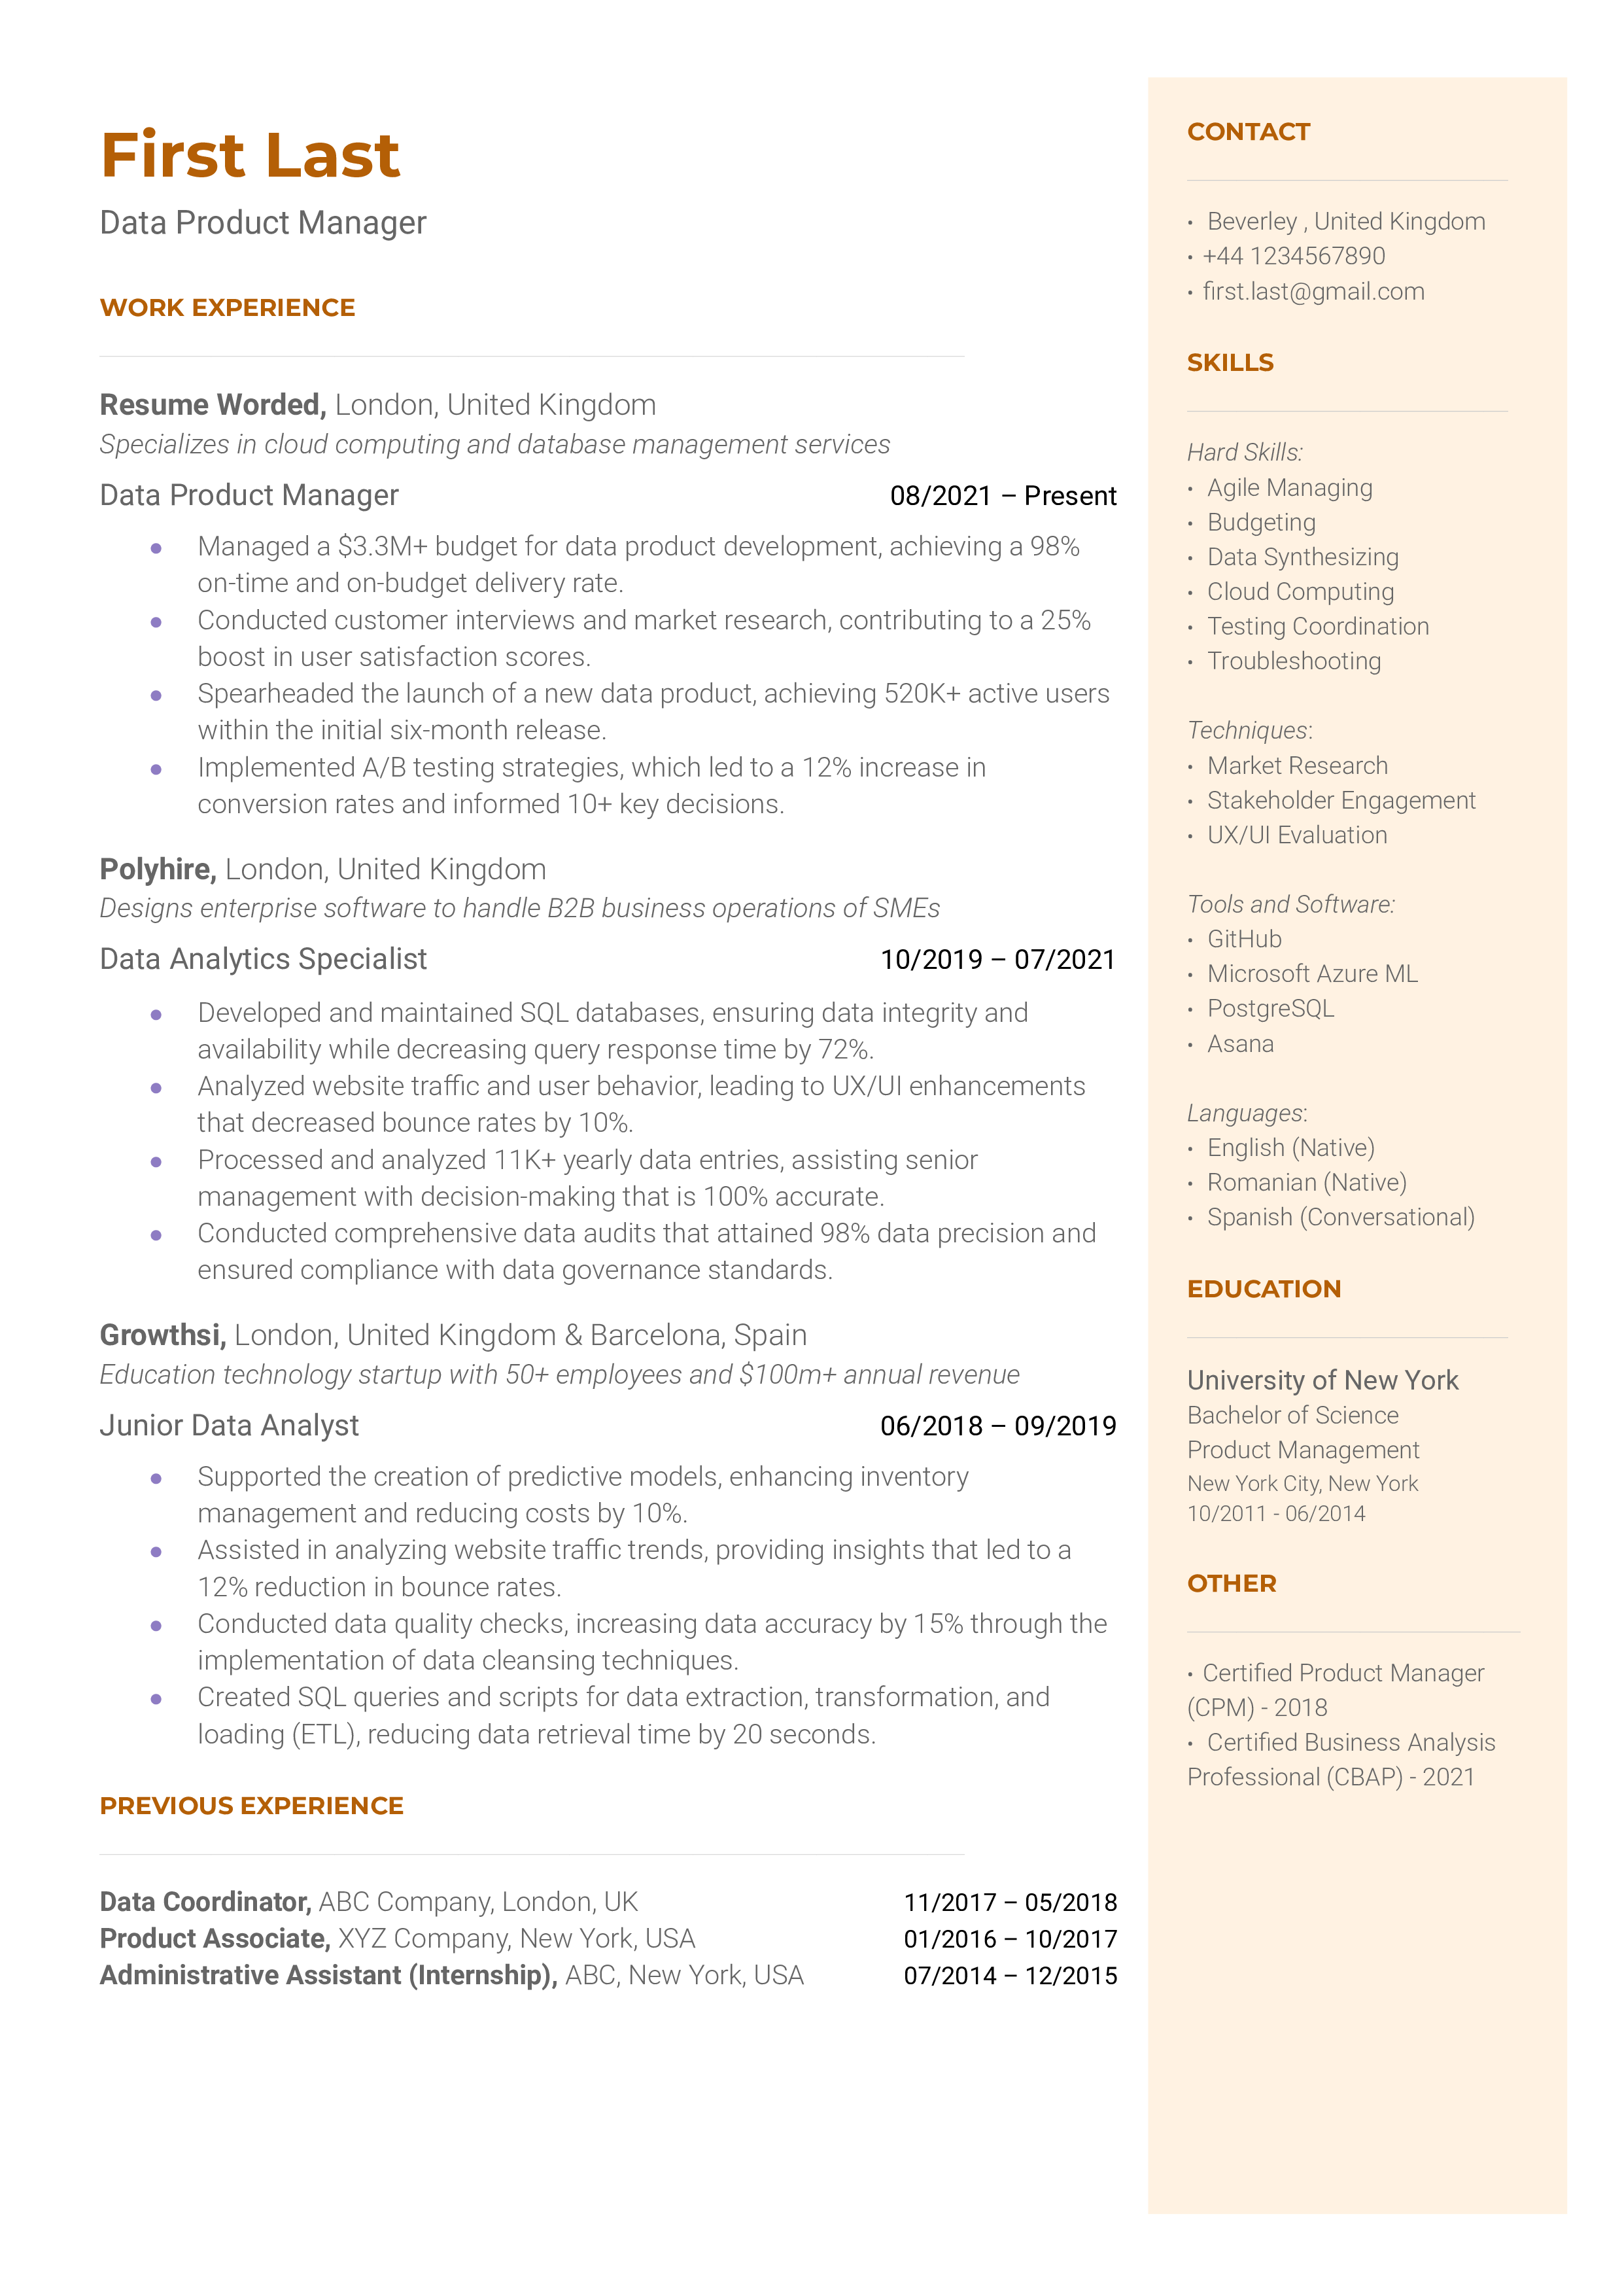 A screenshot of a CV crafted for a Data Product Manager position.